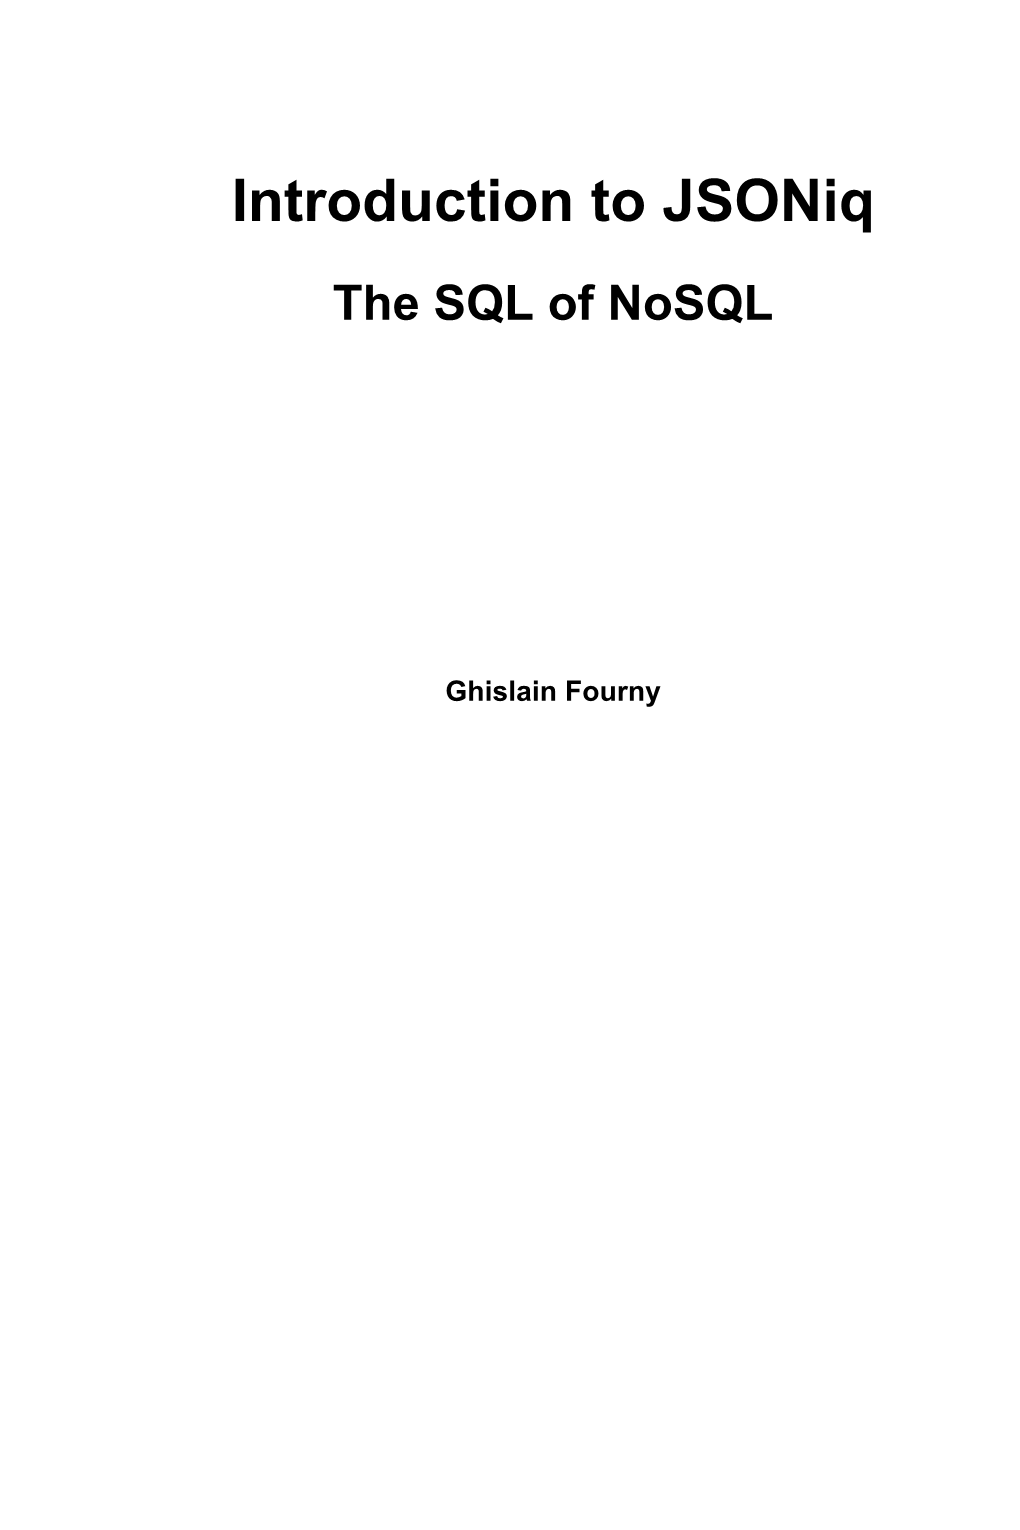 Introduction to Jsoniq the SQL of Nosql